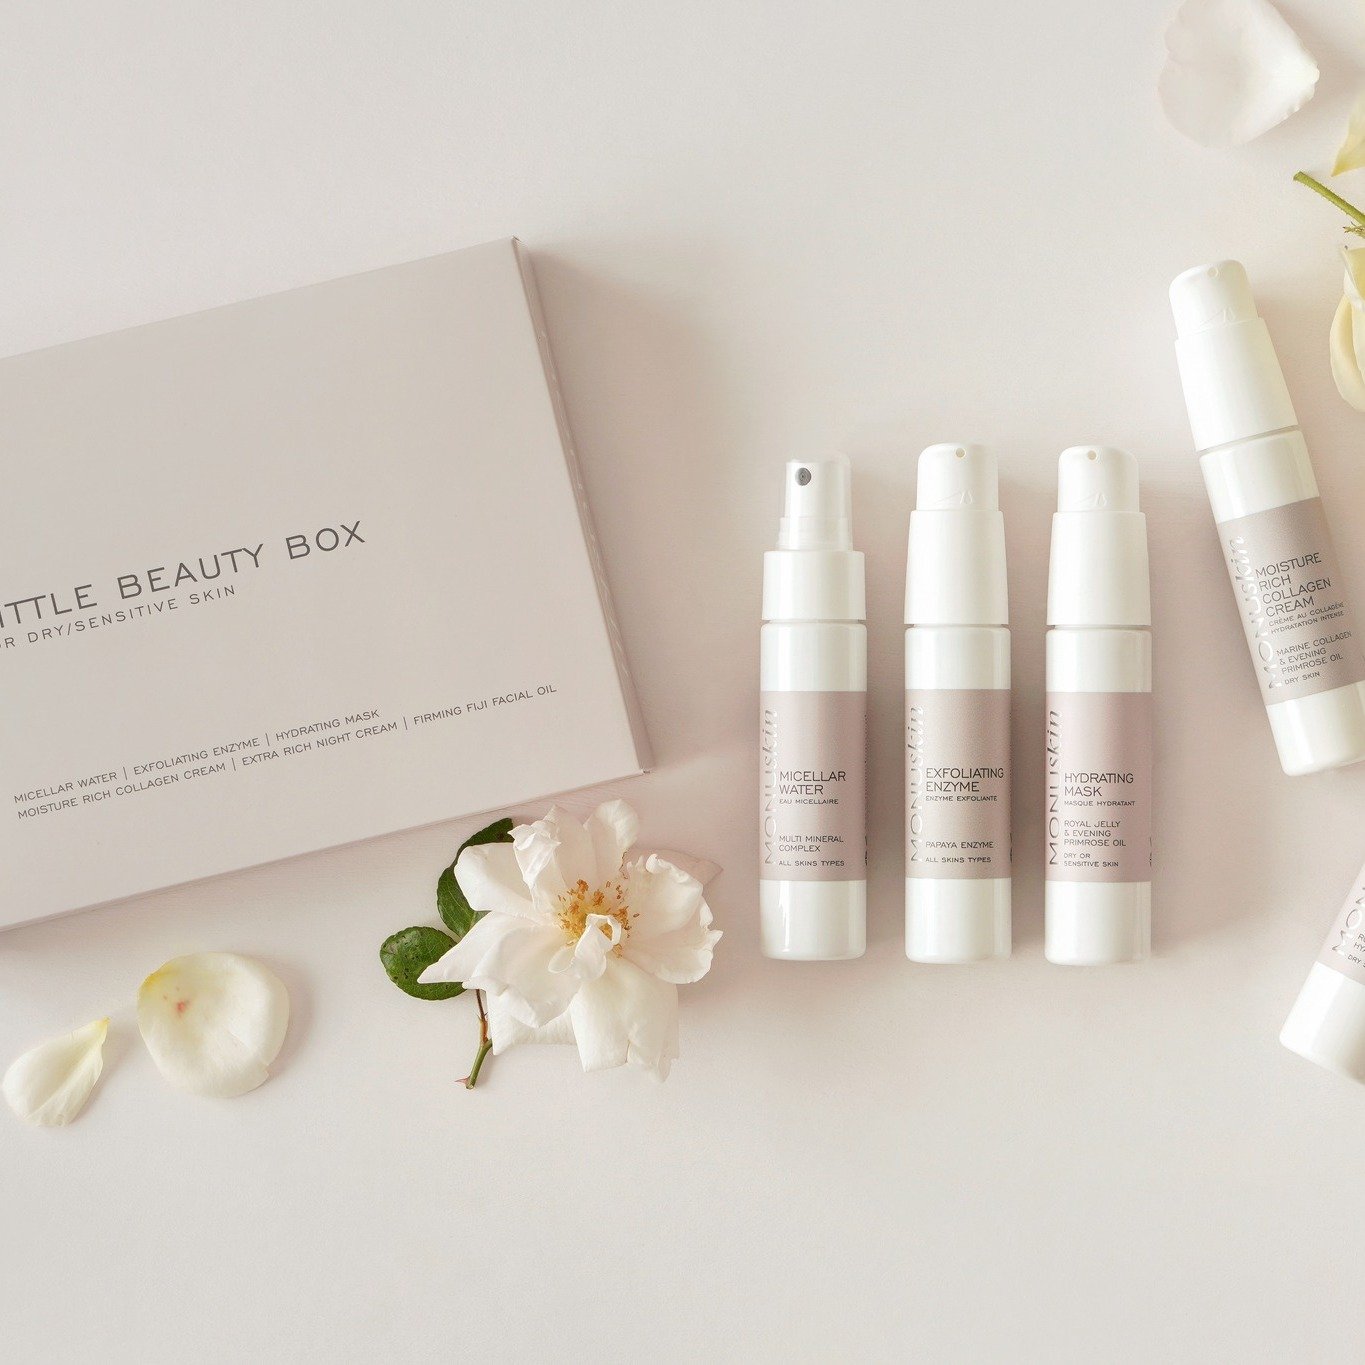 The Little Beauty Box for Dry or Sensitive Skin.......we've done the skincare curation for you

 #smallbatchskincareuk #cleanbeautyblogger #beautytherapist #professionalskintherapist #smallbatchskincare #monuskincare #monuskin